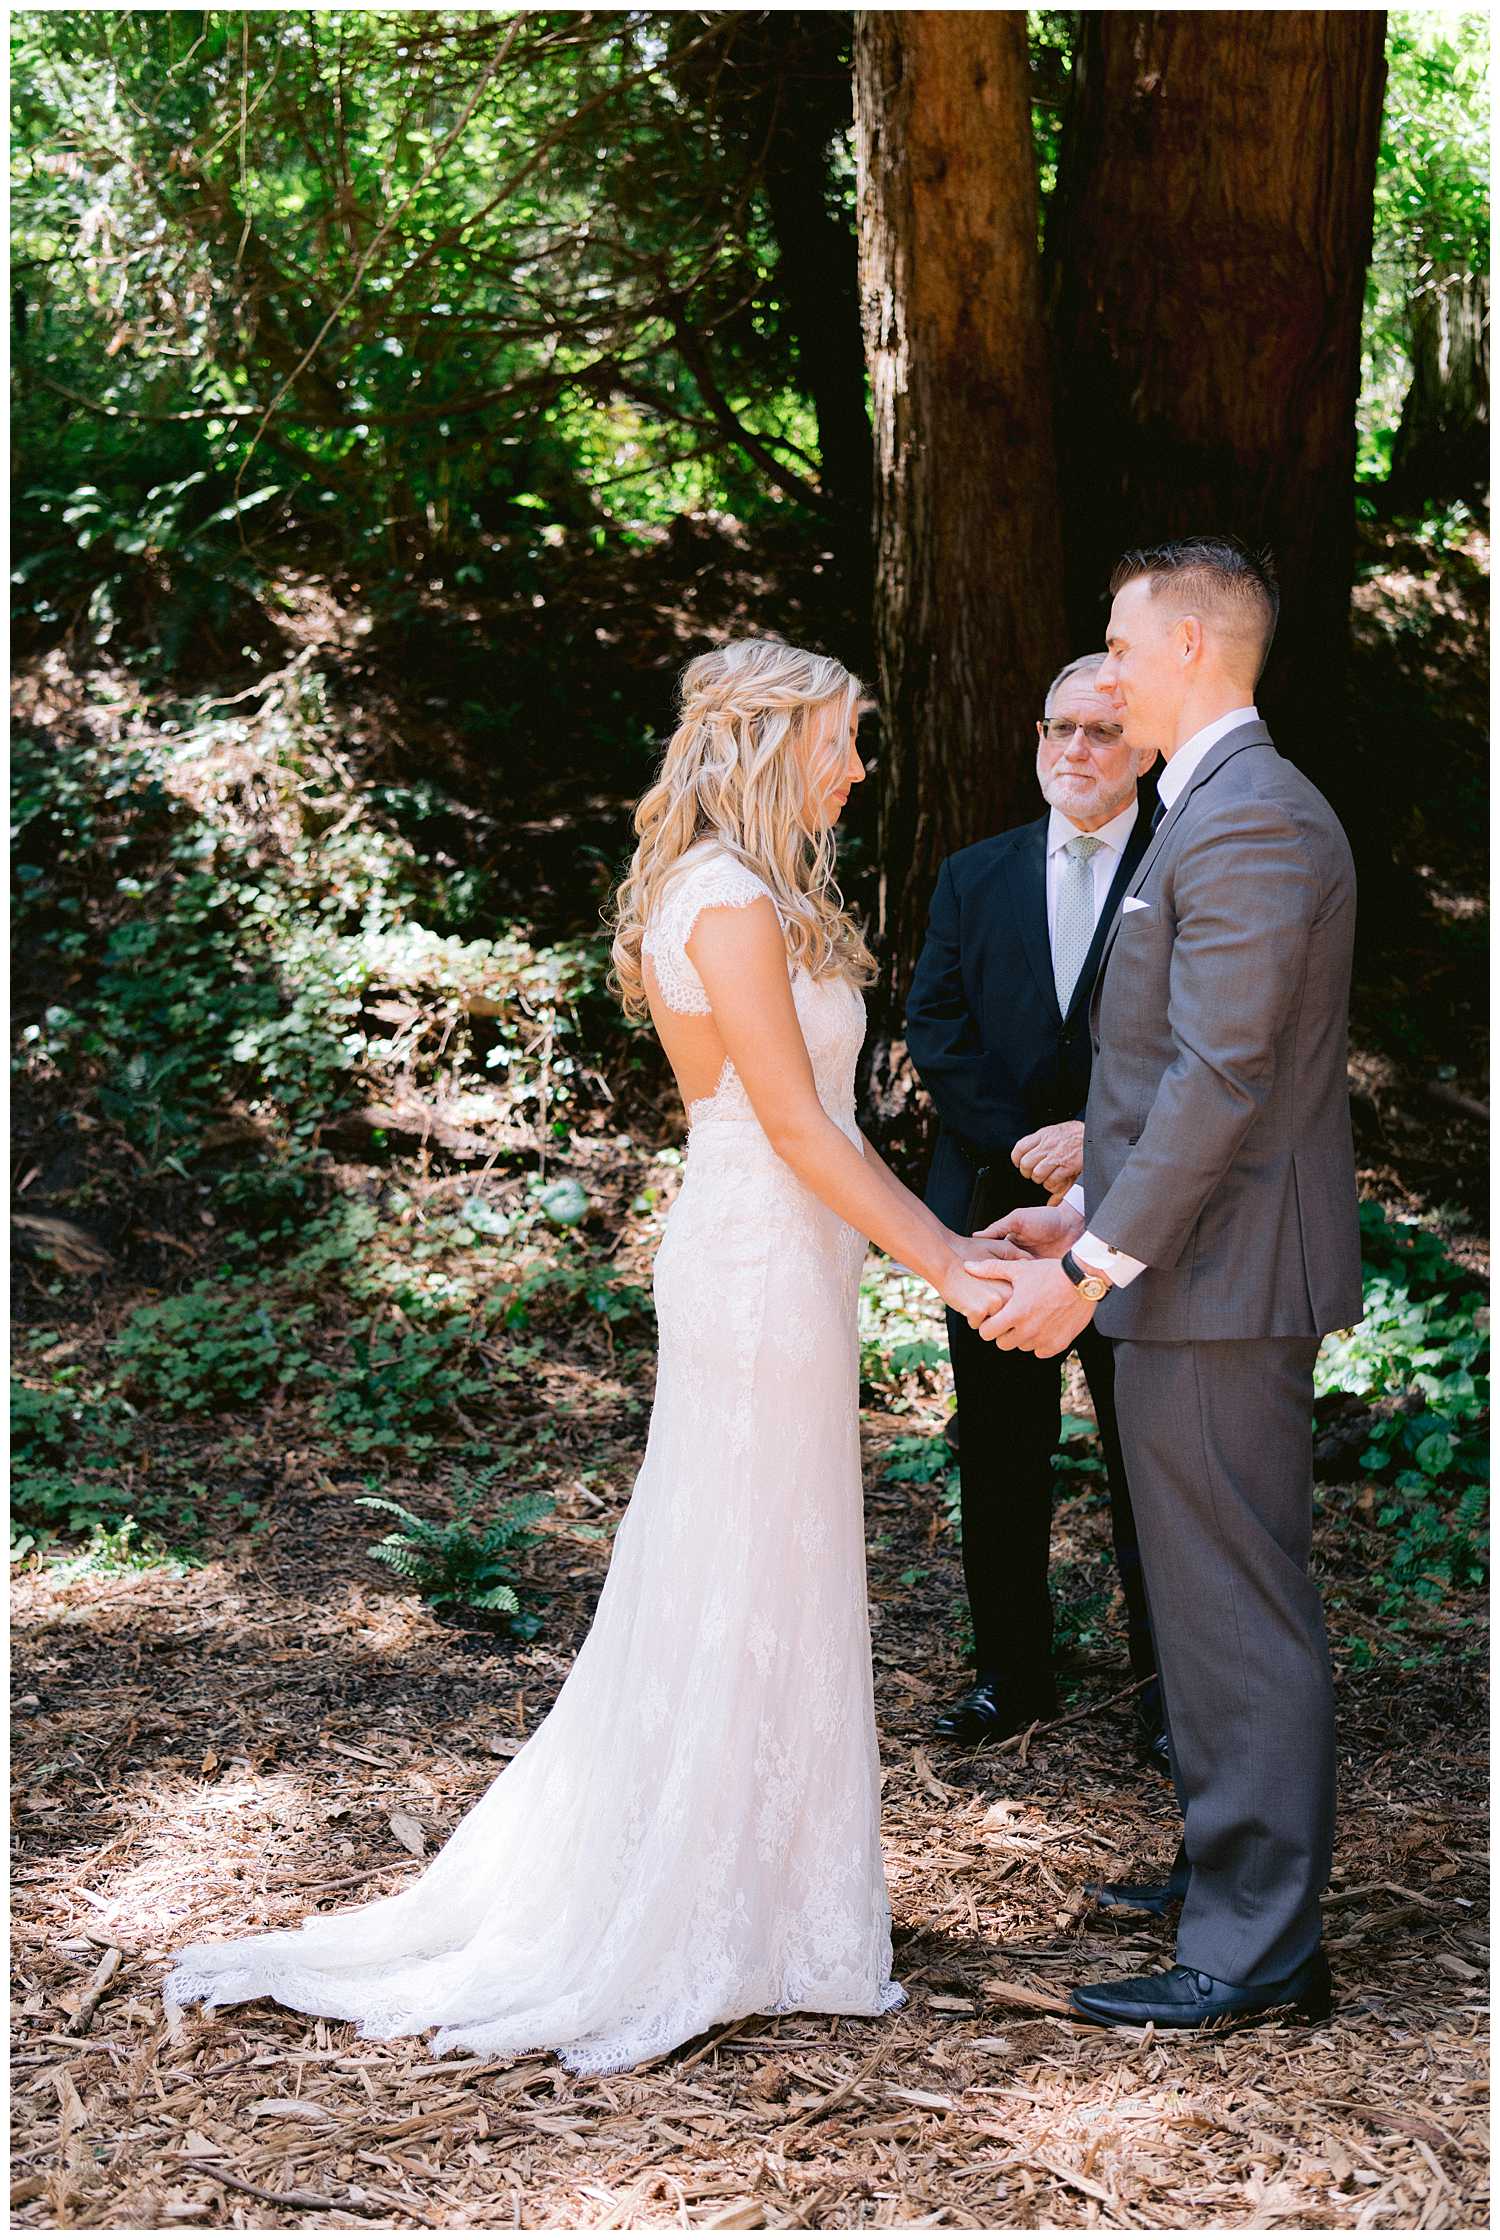 Kelsey and Mitchel holding hands during the ceremony